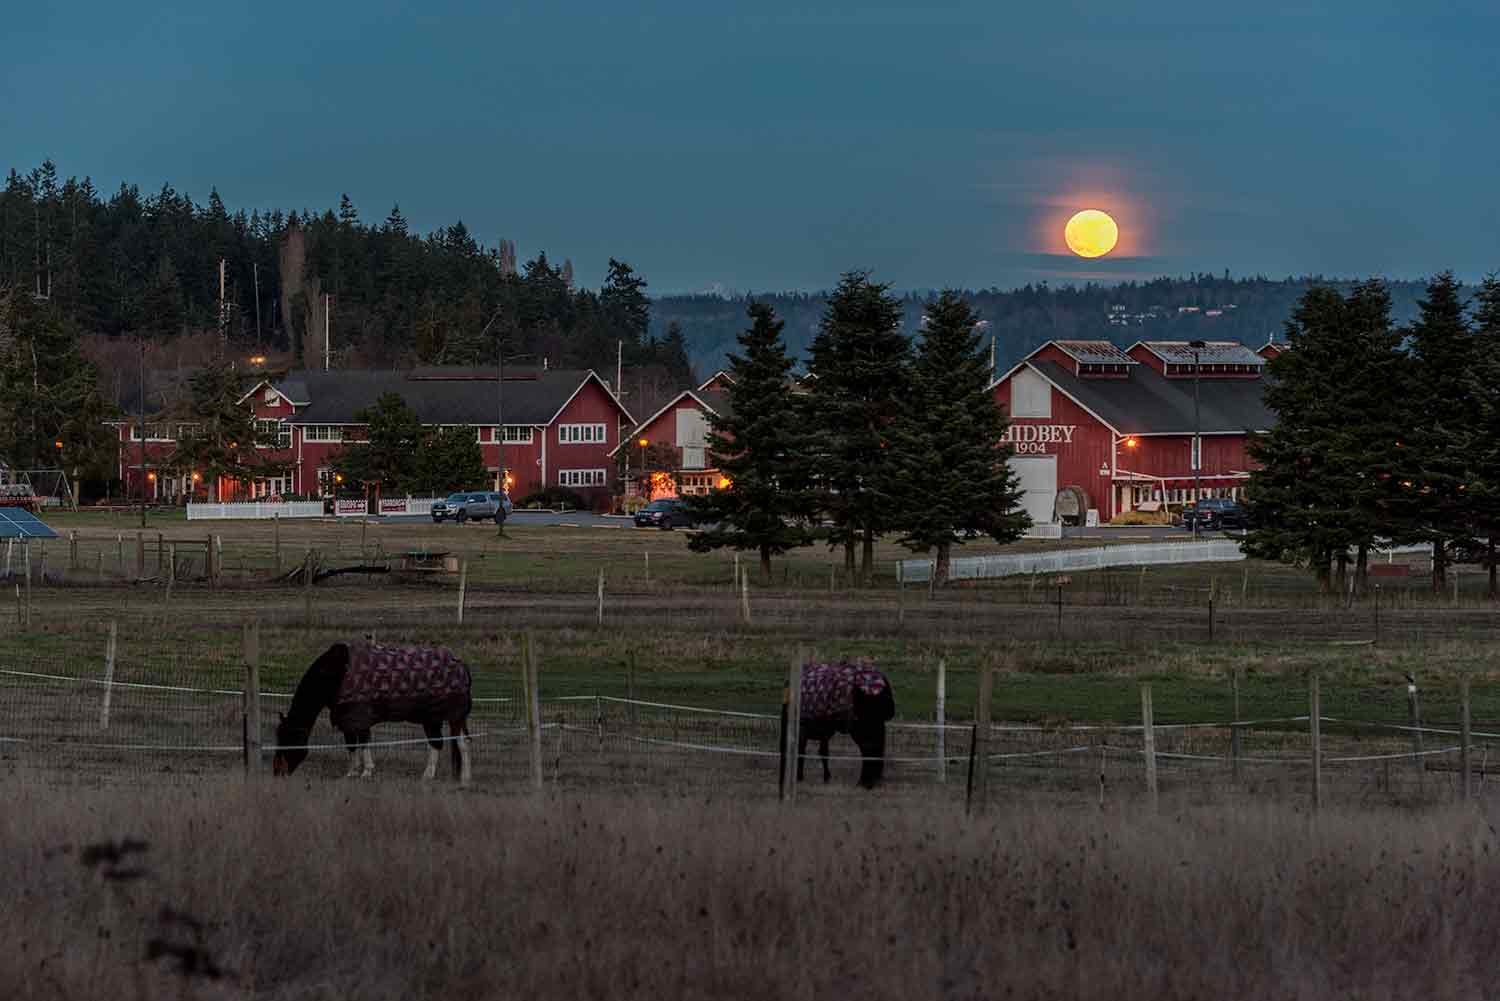 The full moon is rising behind some old farm buildings.  Two horses covered by horse blankets are in the foreground.